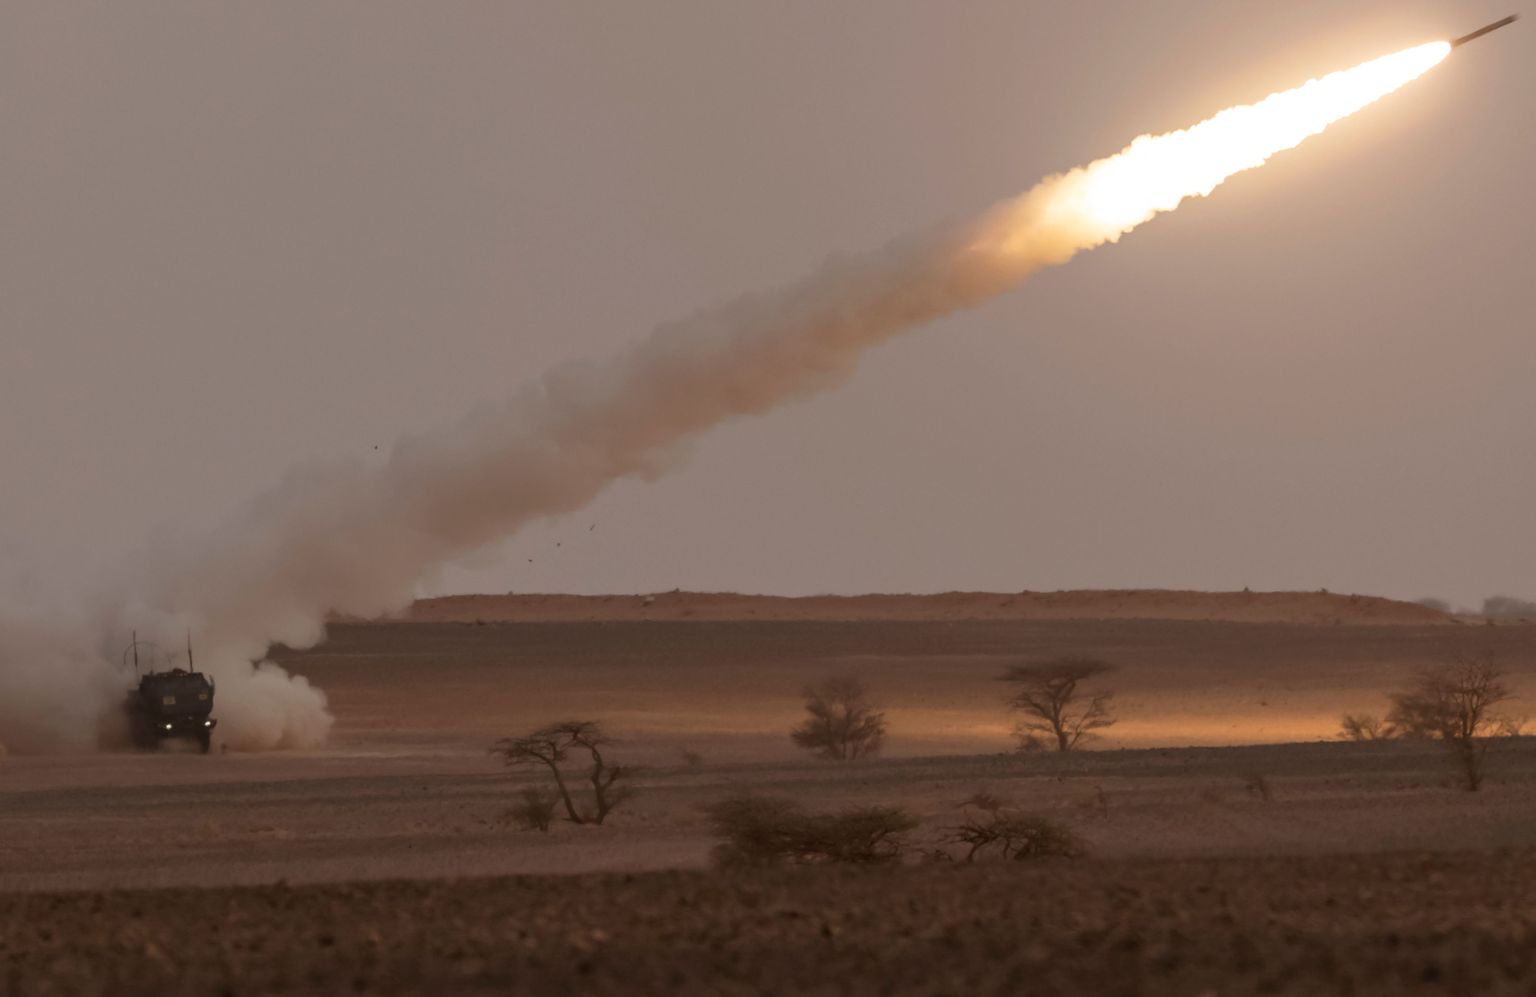 A US M142 High Mobility Artillery Rocket System (HIMARS) launchers fire salvoes in the Grier Labouihi region in Agadir, southern Morocco on June 21, 2022 during the "African Lion 2022" military exercise. (Photo by FADEL SENNA / AFP)